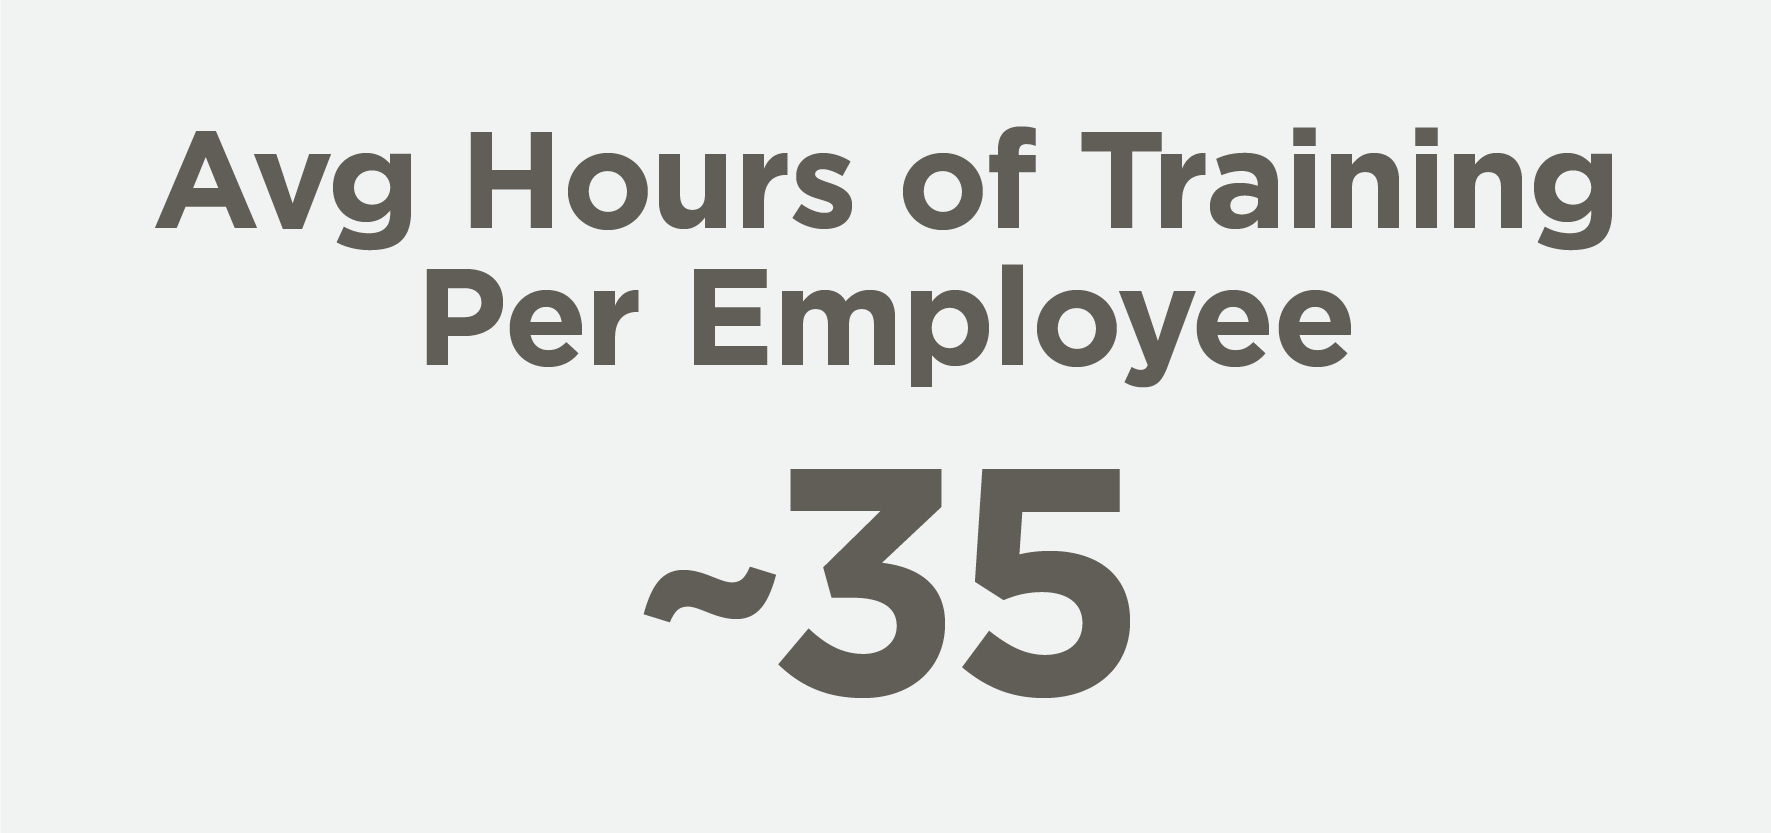 Graphic showing Average Hours of Training Per Employee at about 35